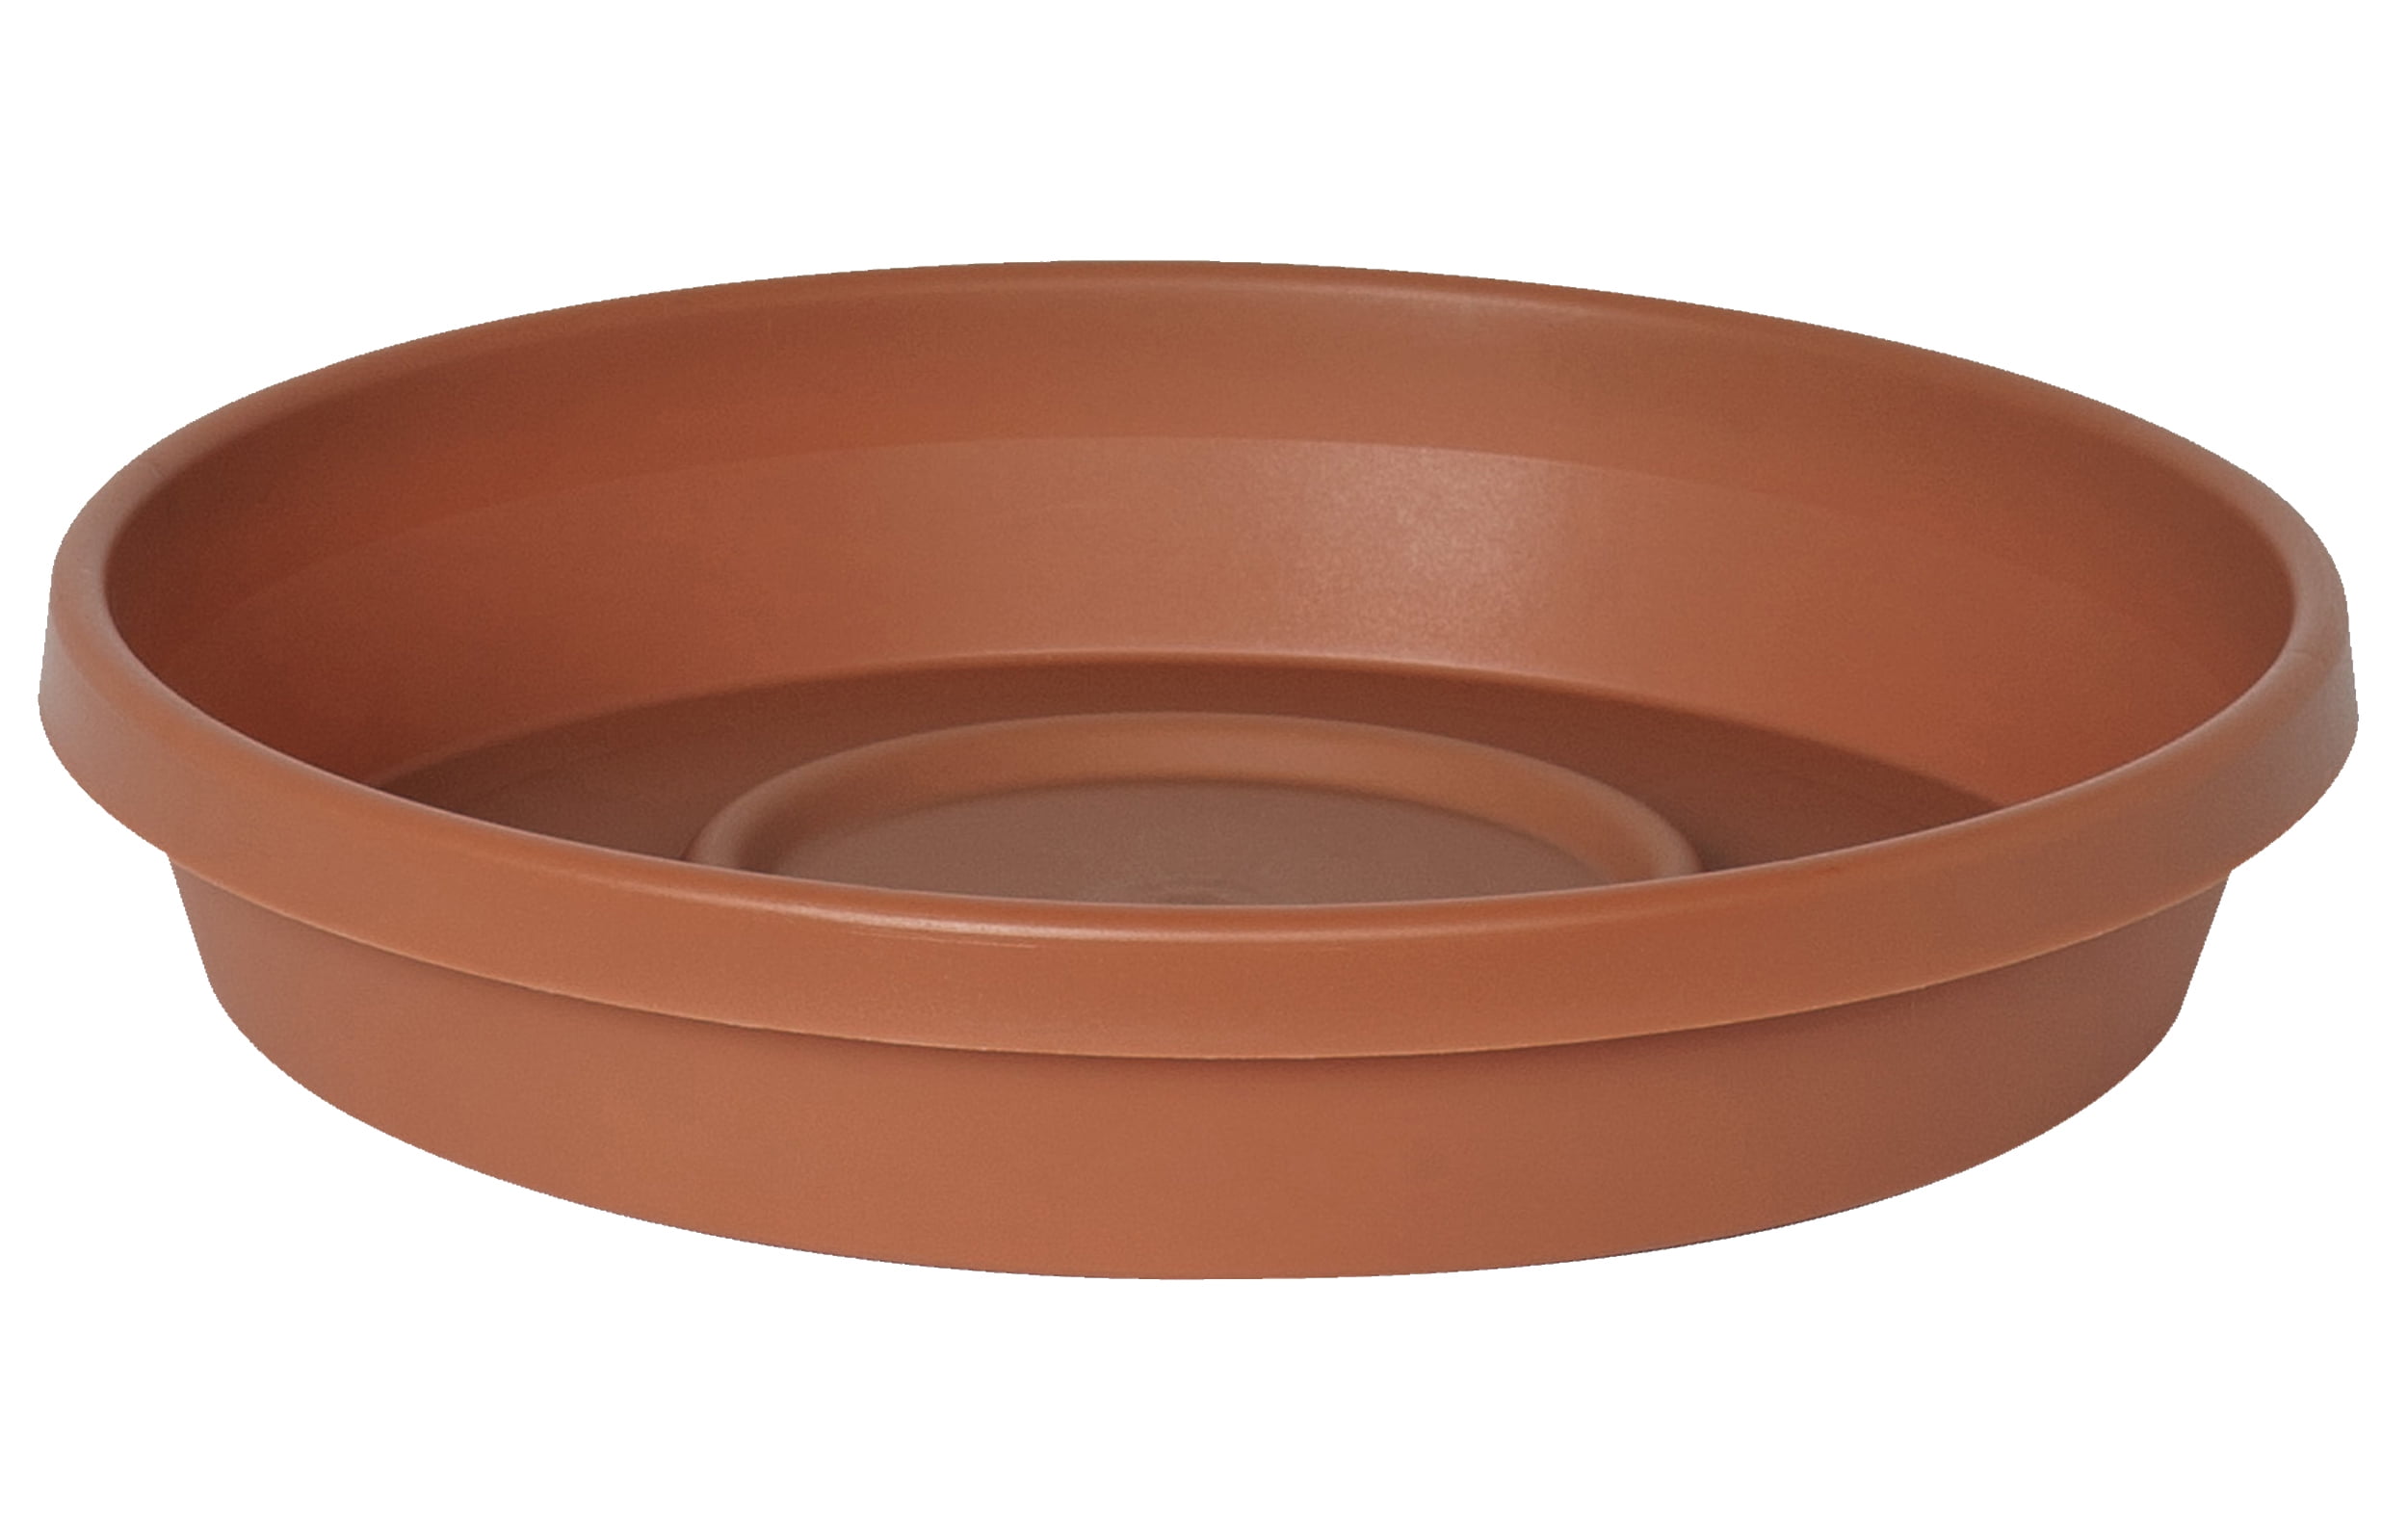 *24* NEW HEAVY DUTY FLOWER POT SAUCERS BASES PLATES FITS 8" PLANTER CLAY STONE 